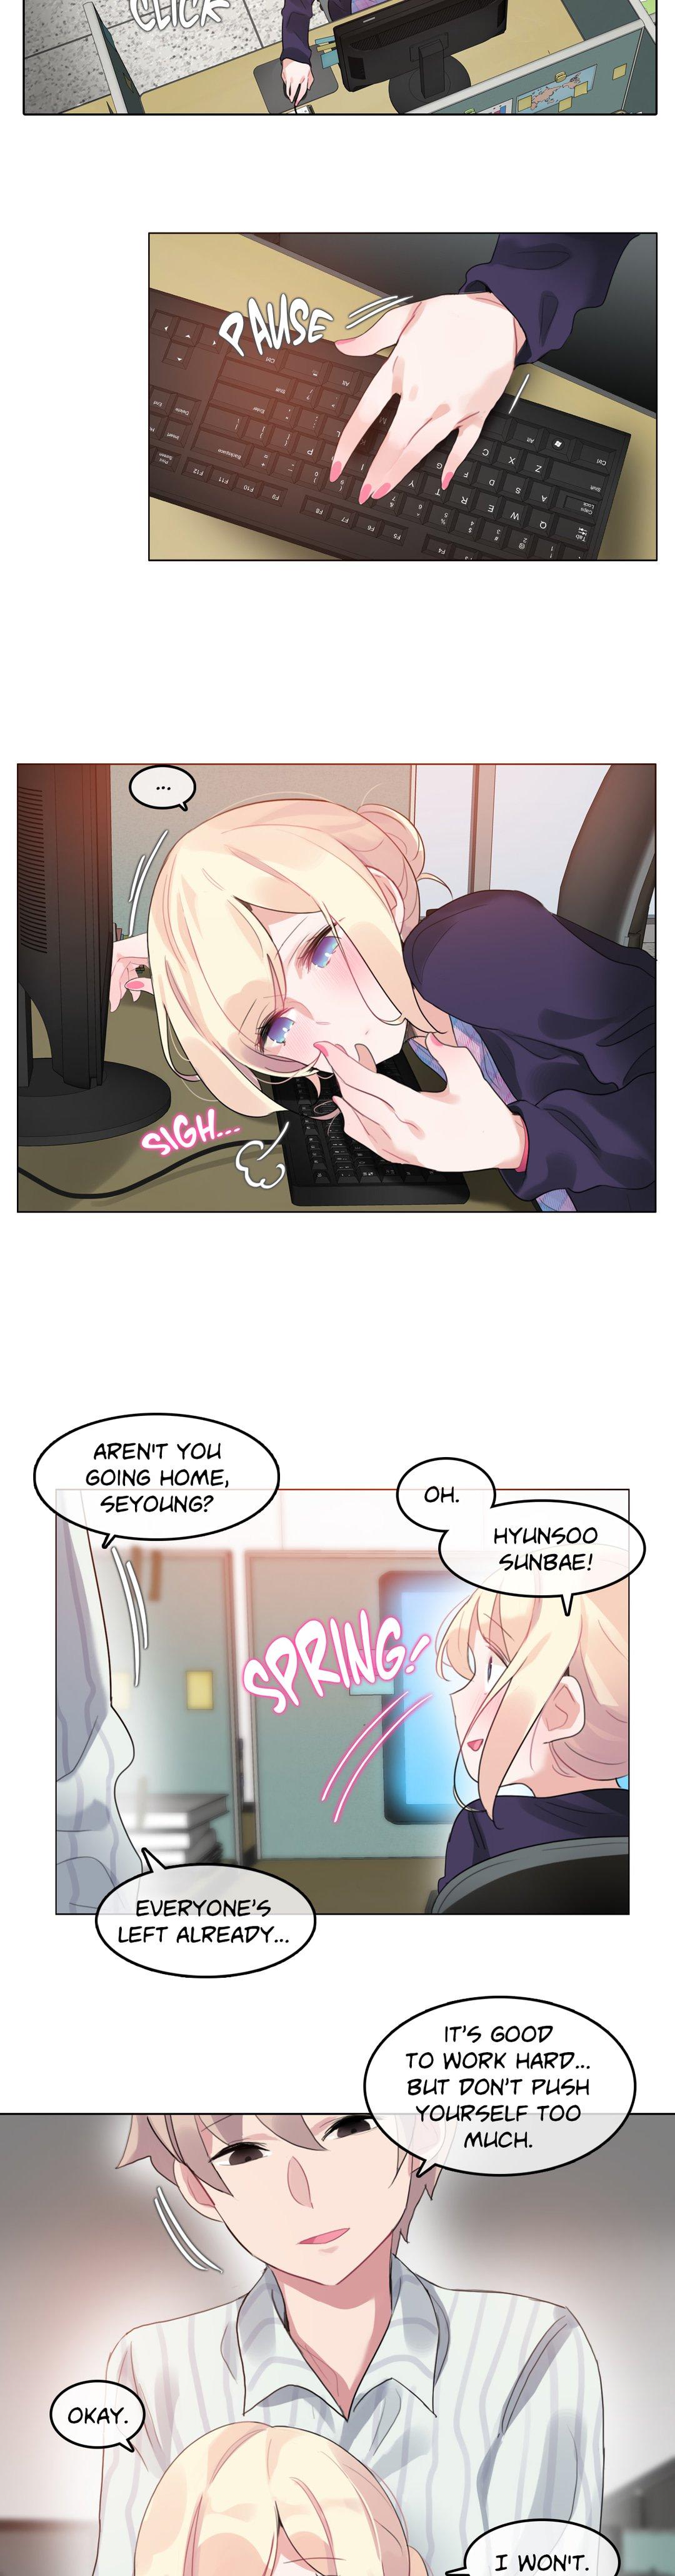 A Pervert's Daily Life • Chapter 51-55 30